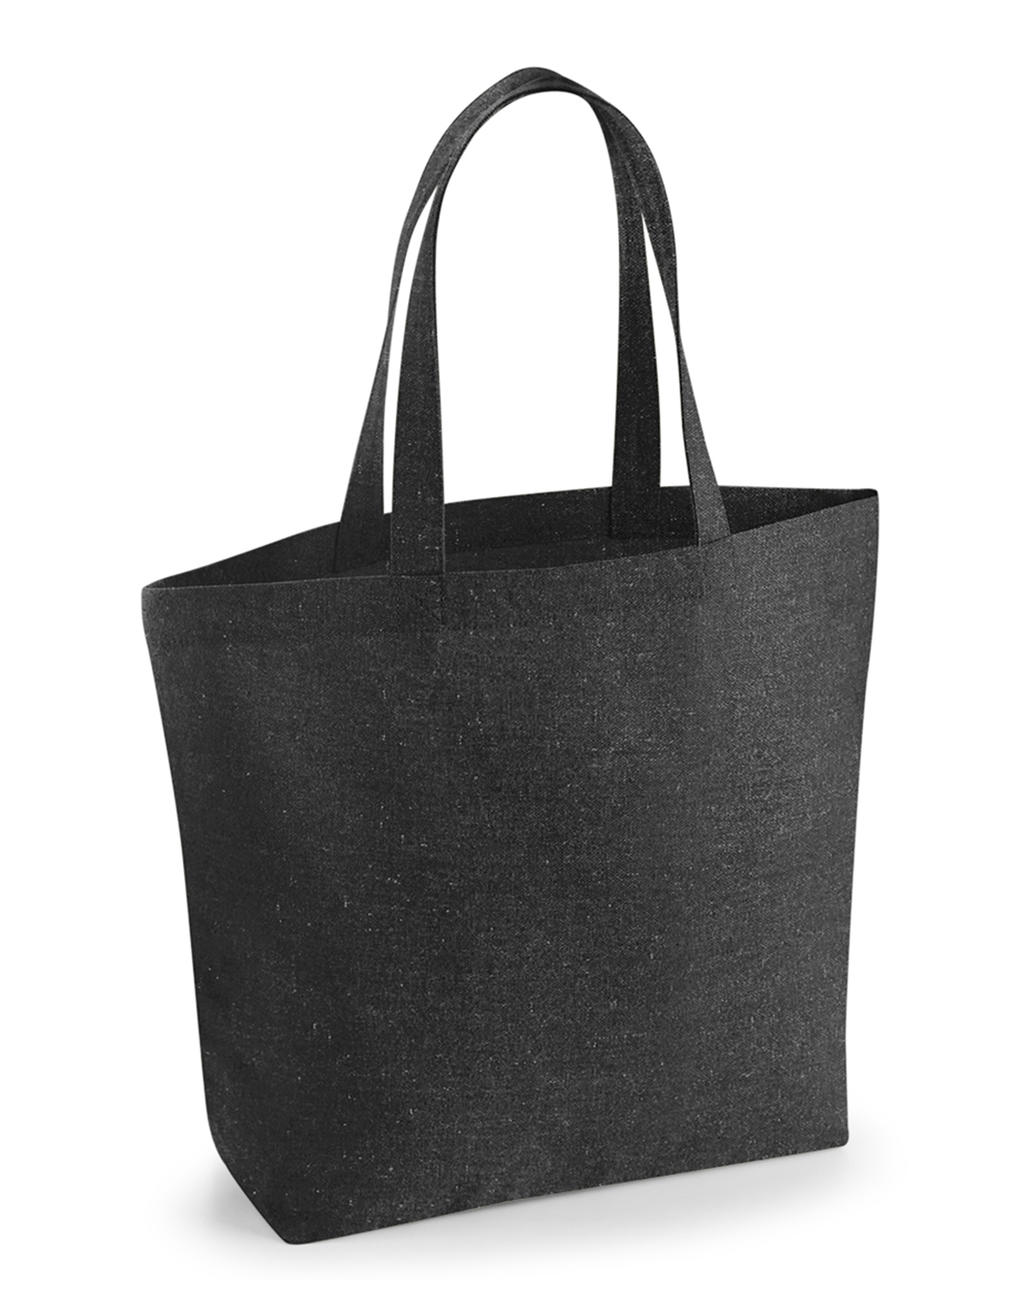  Revive Recycled Maxi Tote in Farbe Natural